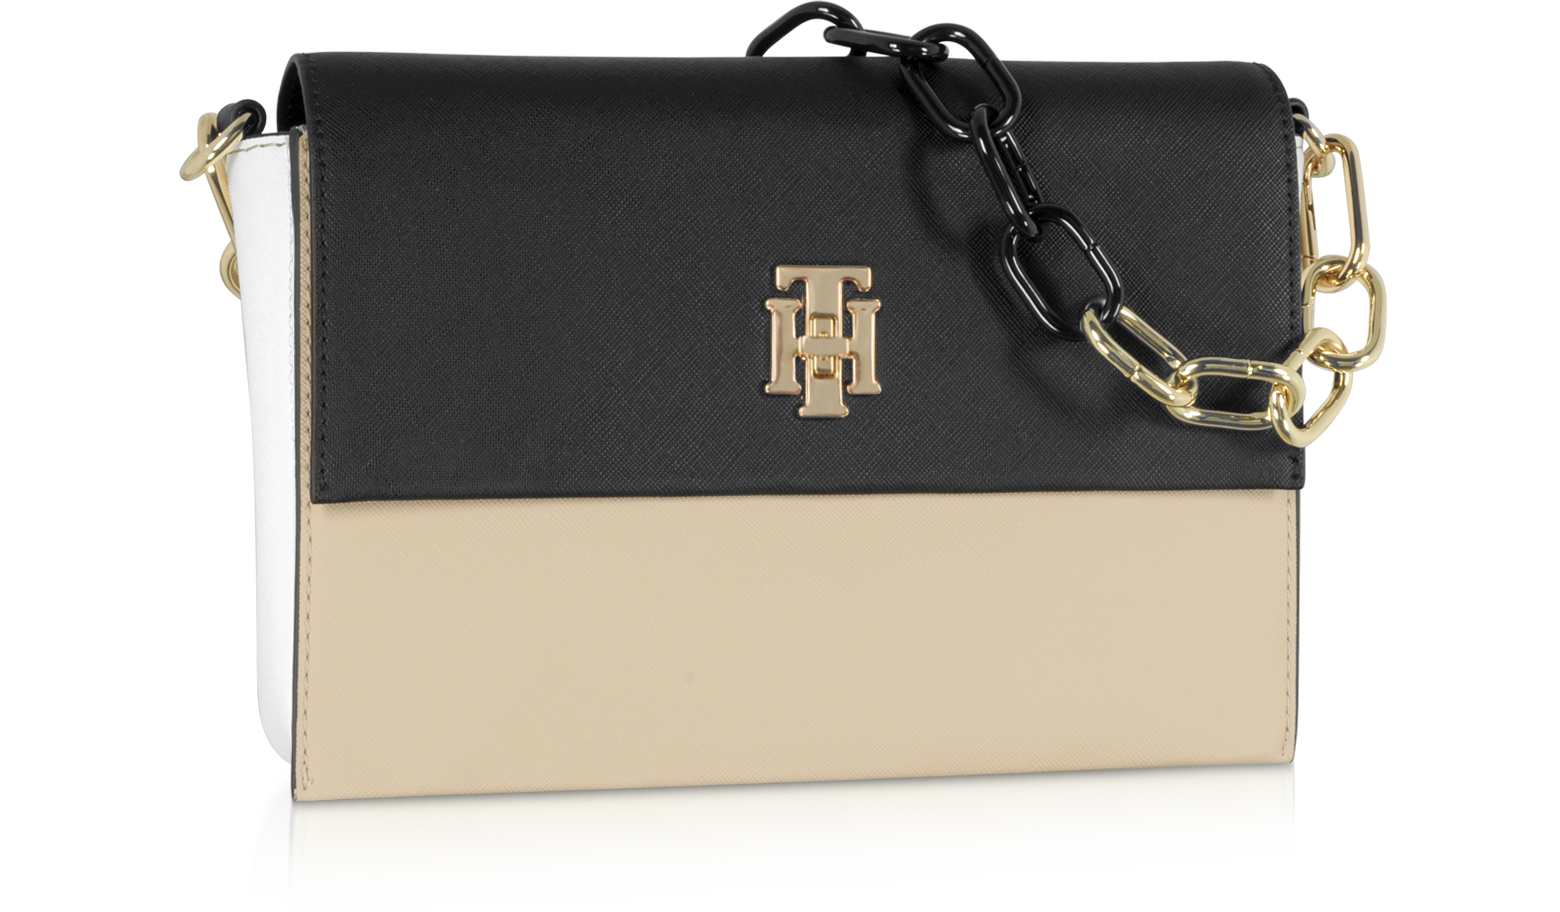 Tommy Hilfiger Sand TH Saffiano Crossover Bag at FORZIERI